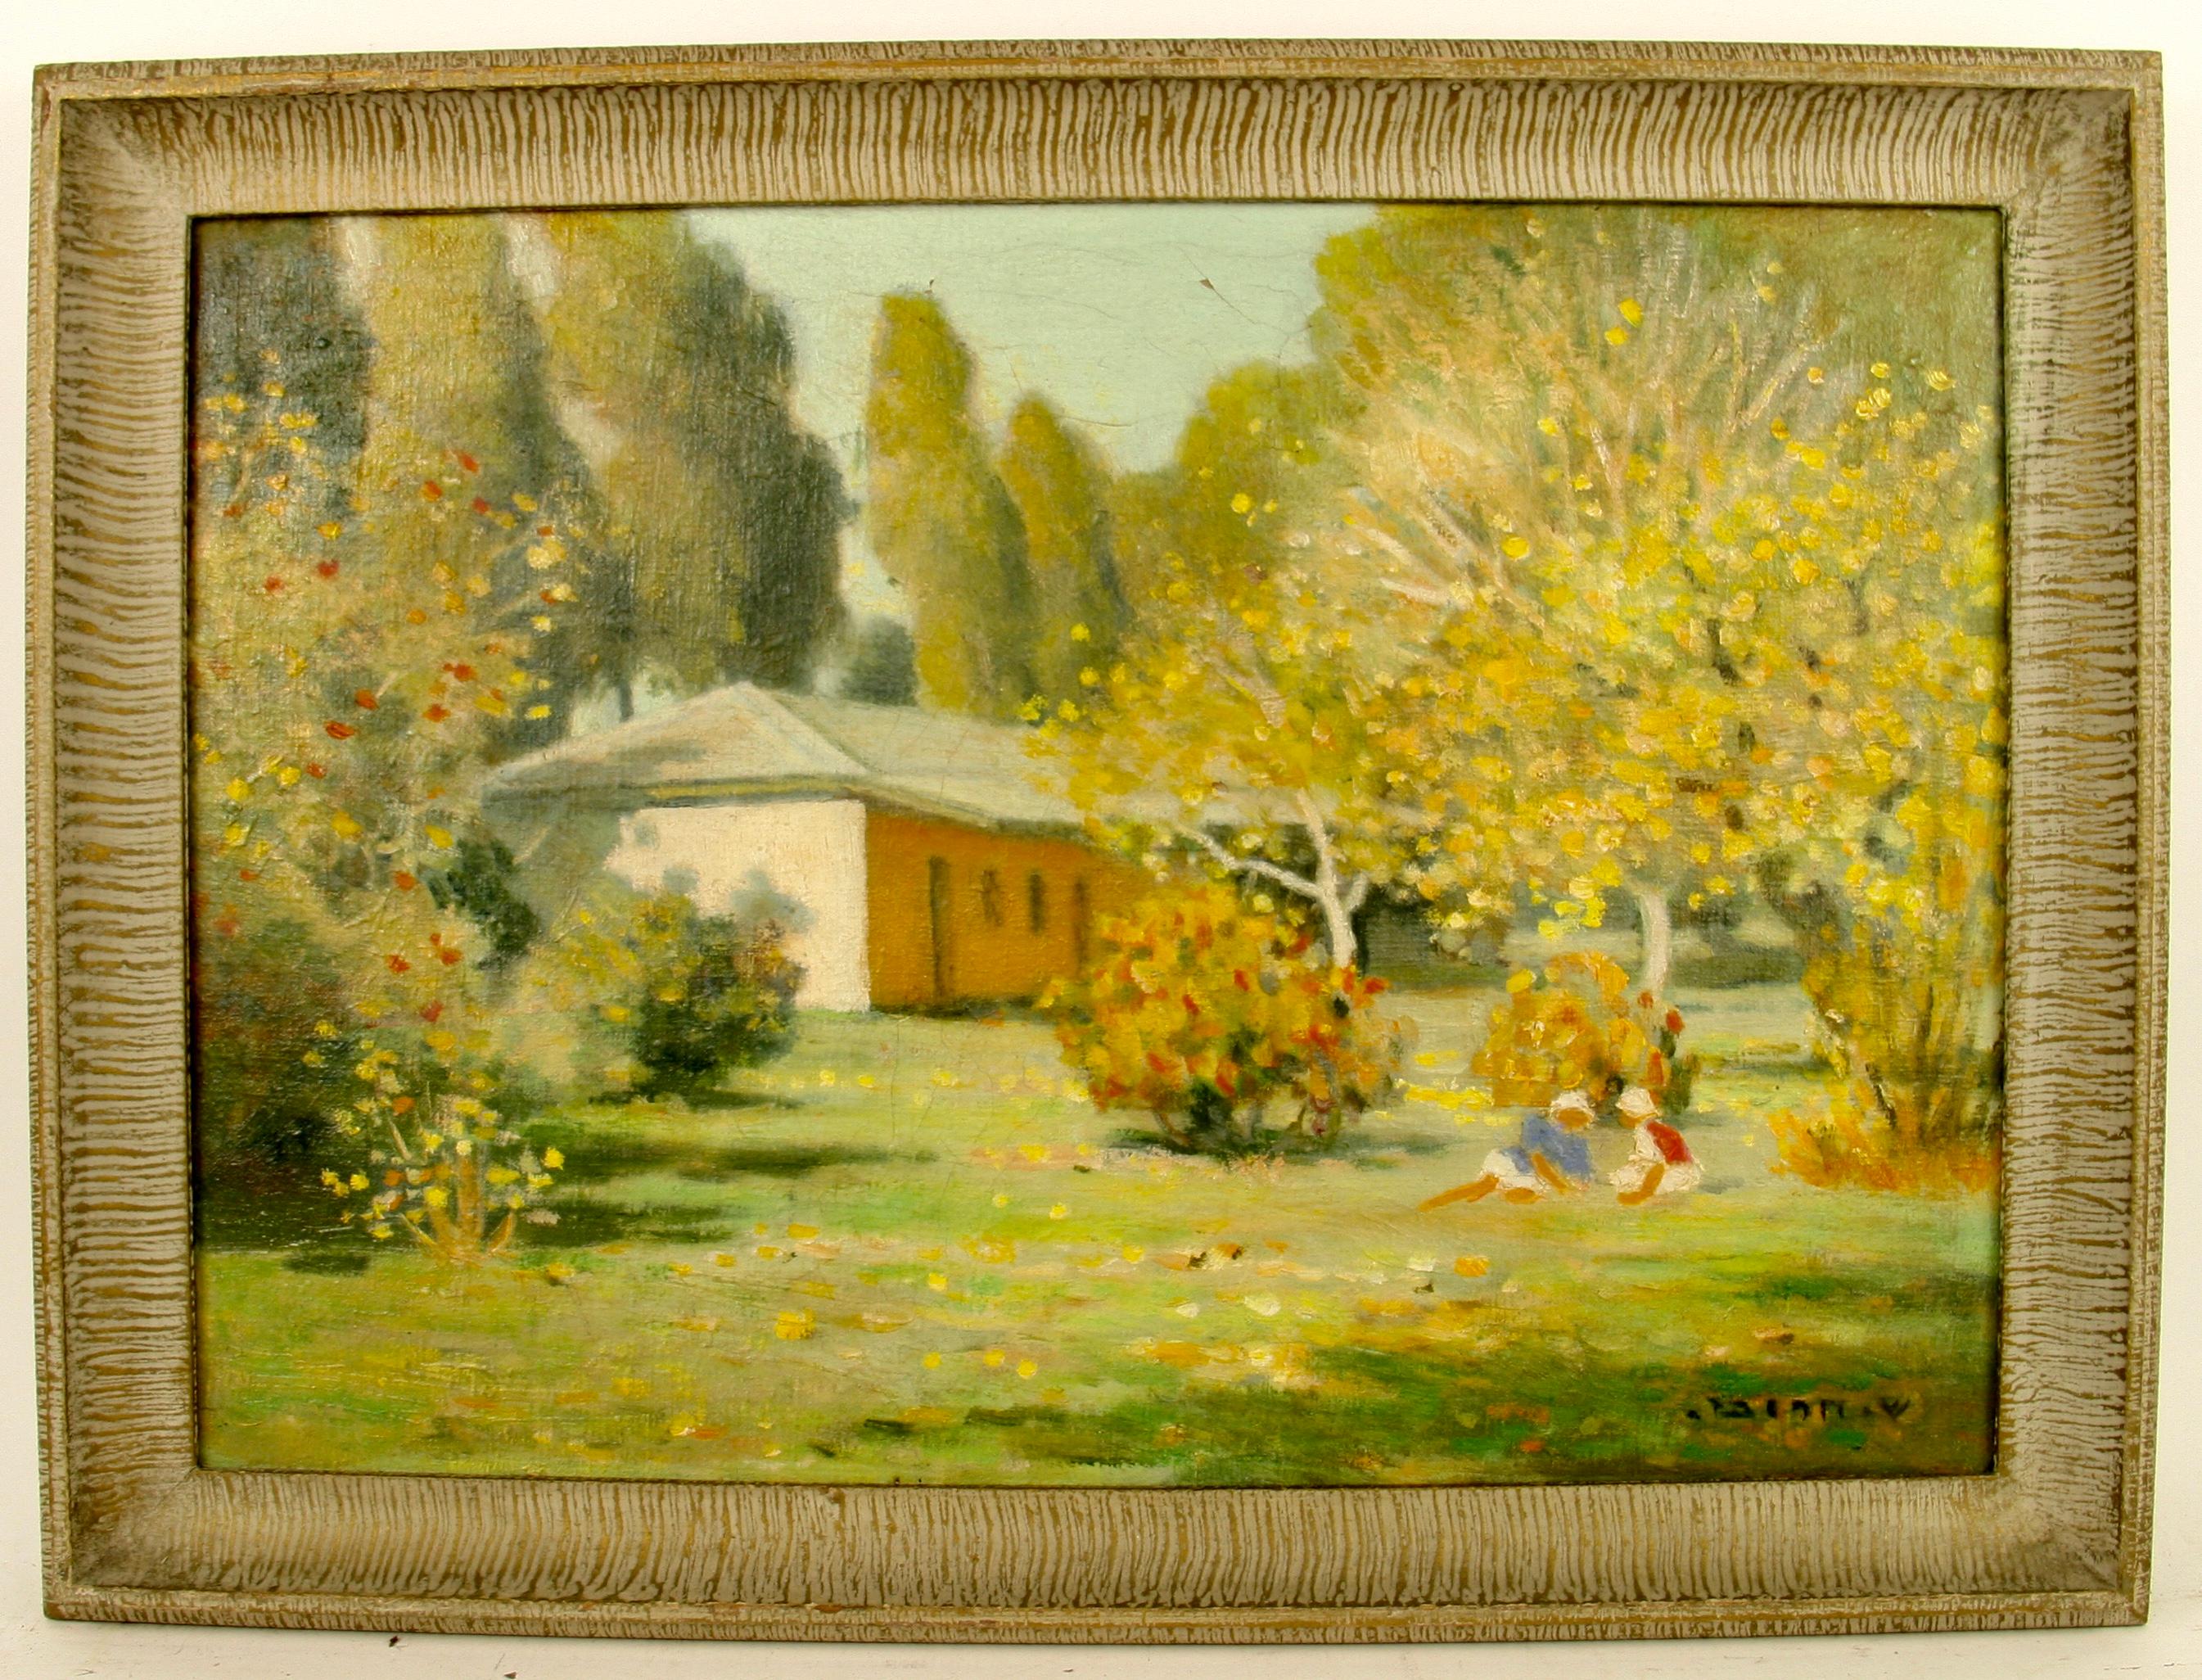 Antique Impressionistic Landscape Oil Painting  with Children Circa 1940's For Sale 5